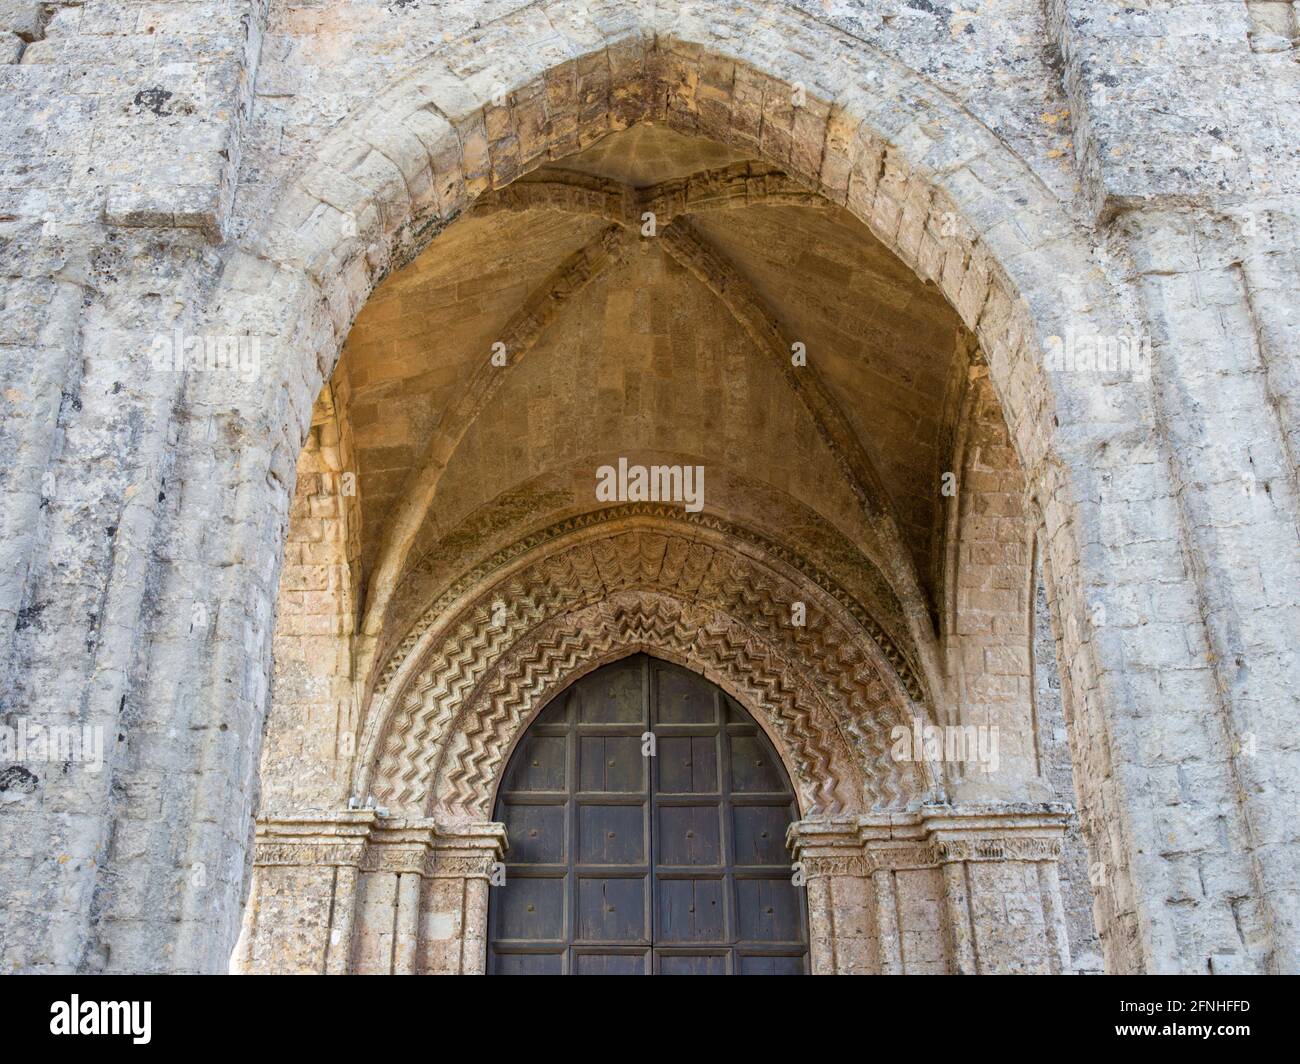 Erice, Trapani, Sicily, Italy. Striking rib-vaulted portico above west door of the hilltop 14th century Cathedral of Santa Maria Assunta. Stock Photo